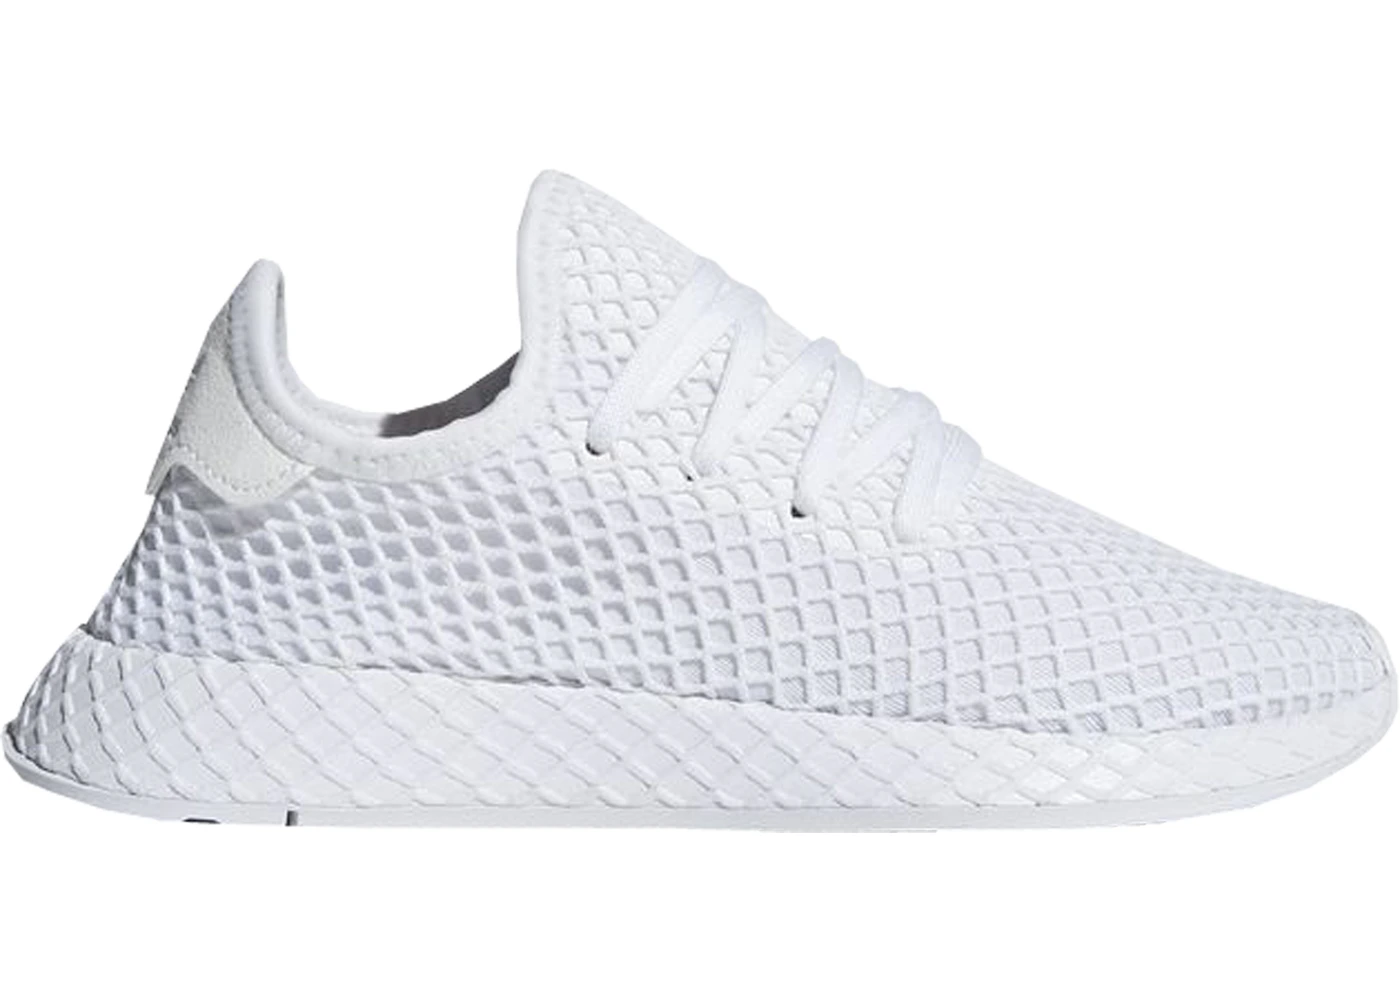 adidas Deerupt White (Youth) - CQ2935 - US